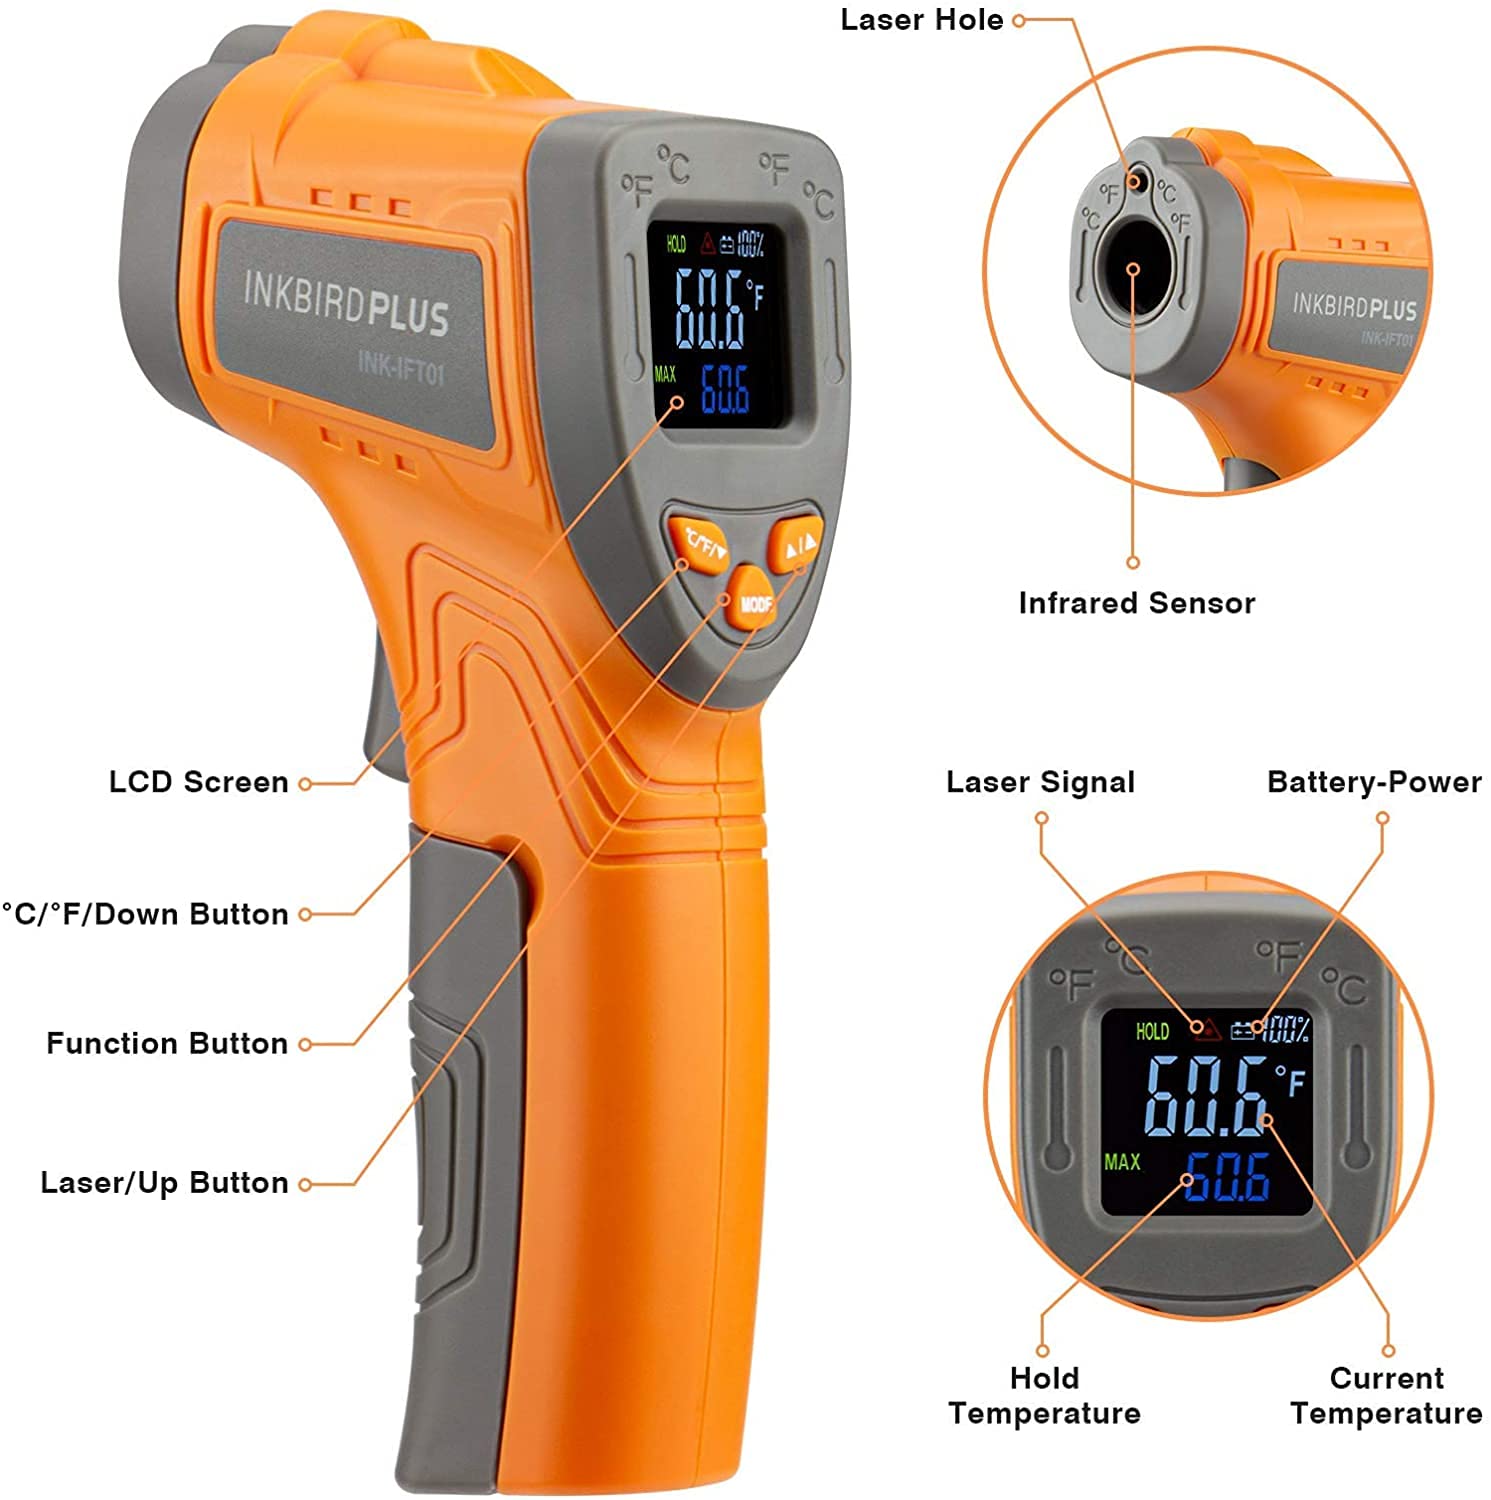 INKBIRD Infrared Thermometer Digital Laser Temperature Gun -58℉~1022℉ INK-IFT01 and Instant Read Meat Thermometer IHT-1P - Adjustable Emissivity Thermometers Gun for Cooking BBQ Oven Pizza